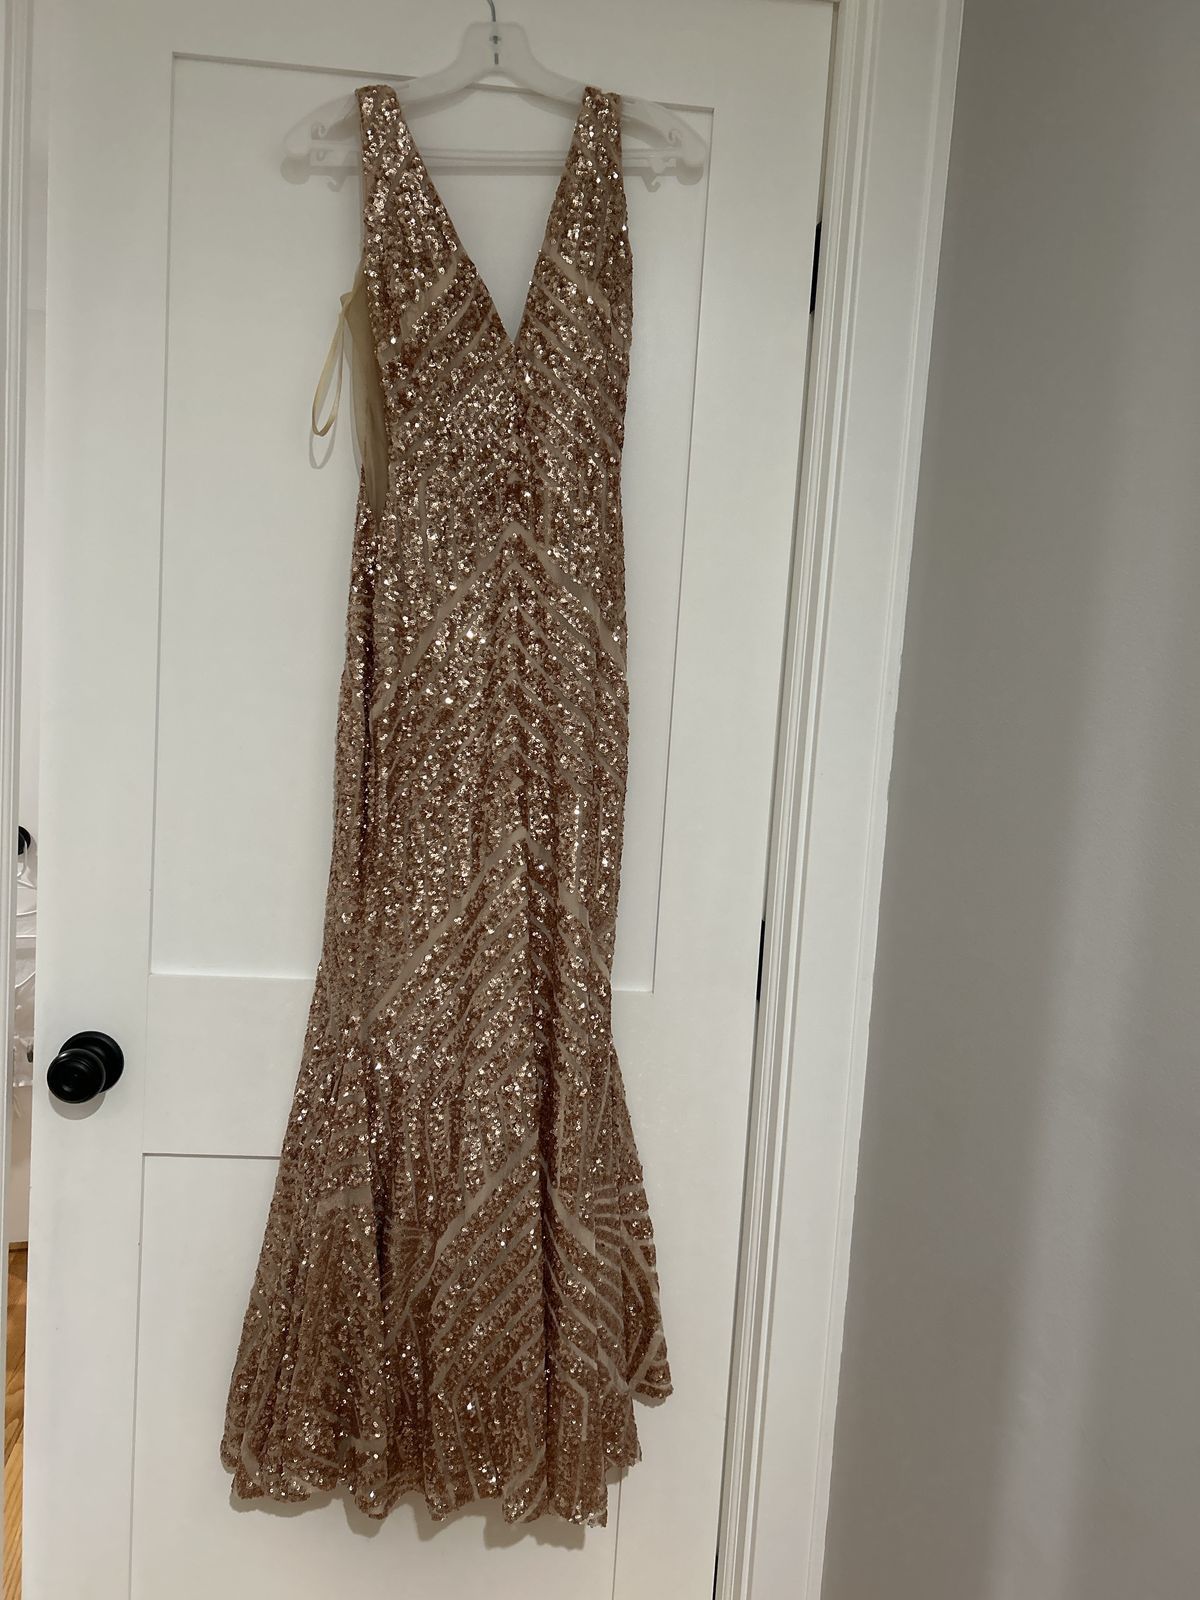 Rose Good Prom Dress looking To Sell In 24 Hours